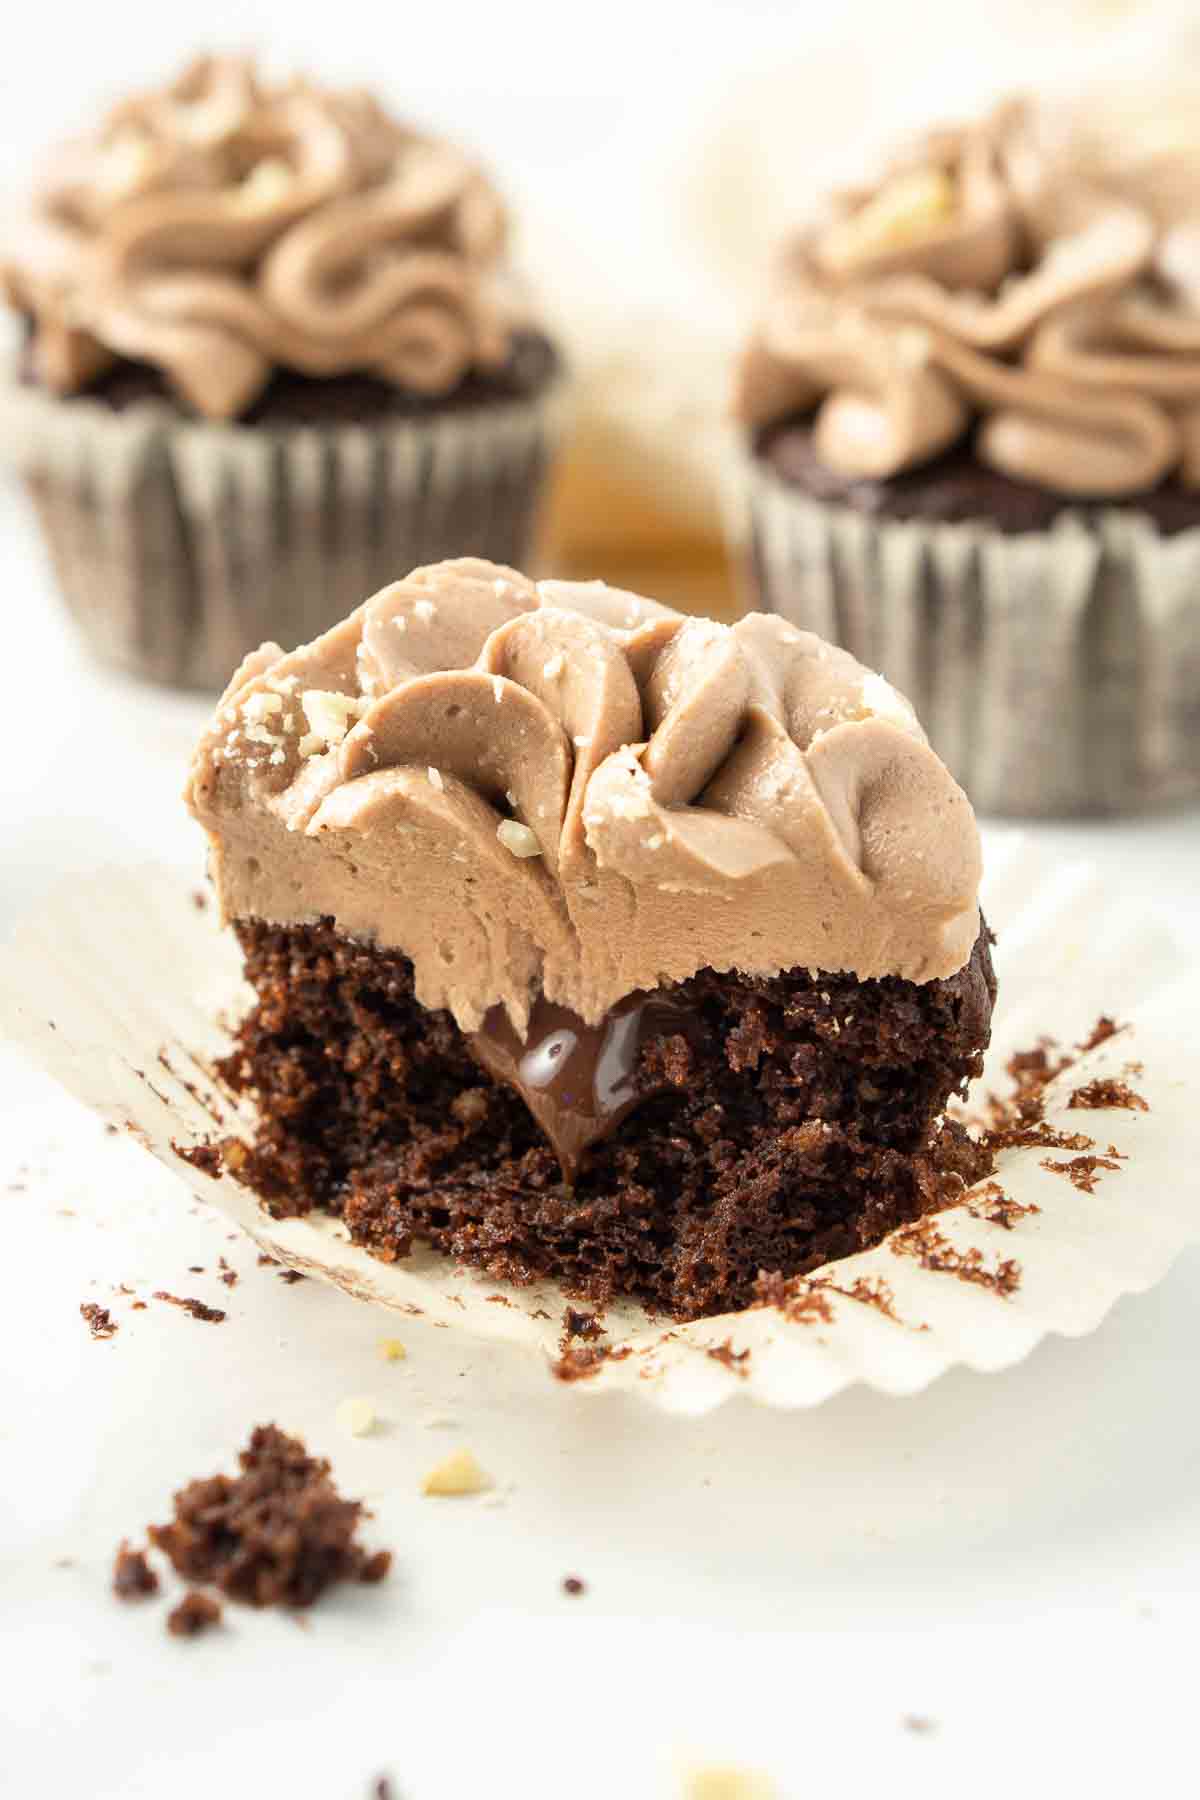 Chocolate hazelnut cupcake cut in half with chocolate spread in the middle oozing out. 